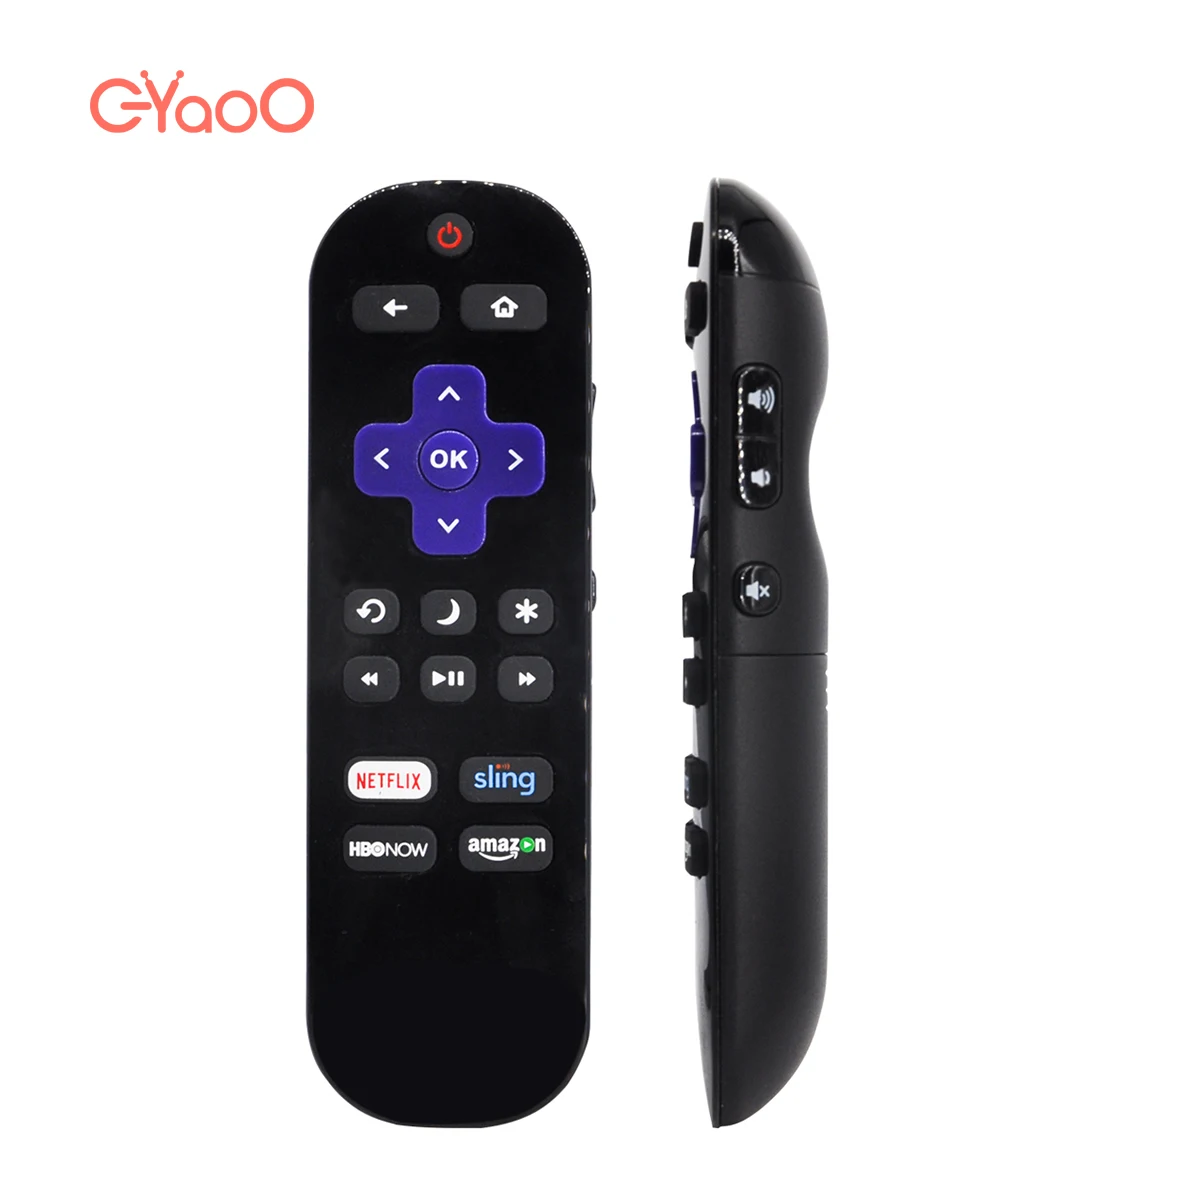 

LC-32LB481C TV Remote Control RC280 For Sharp TVS Netflix HBO Sling Amazon